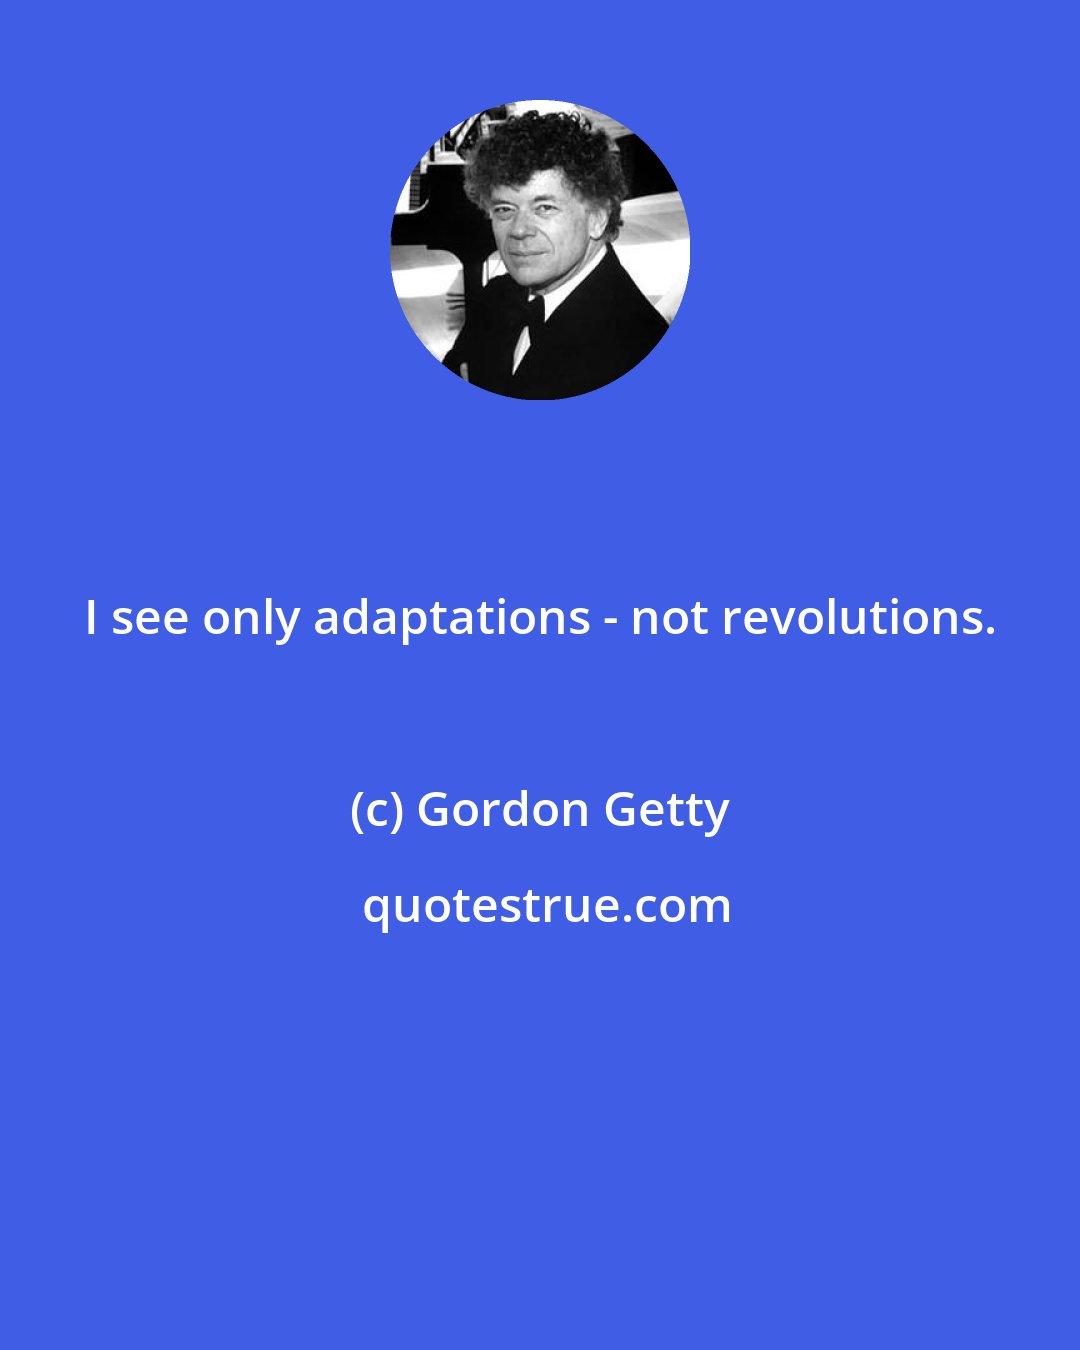 Gordon Getty: I see only adaptations - not revolutions.